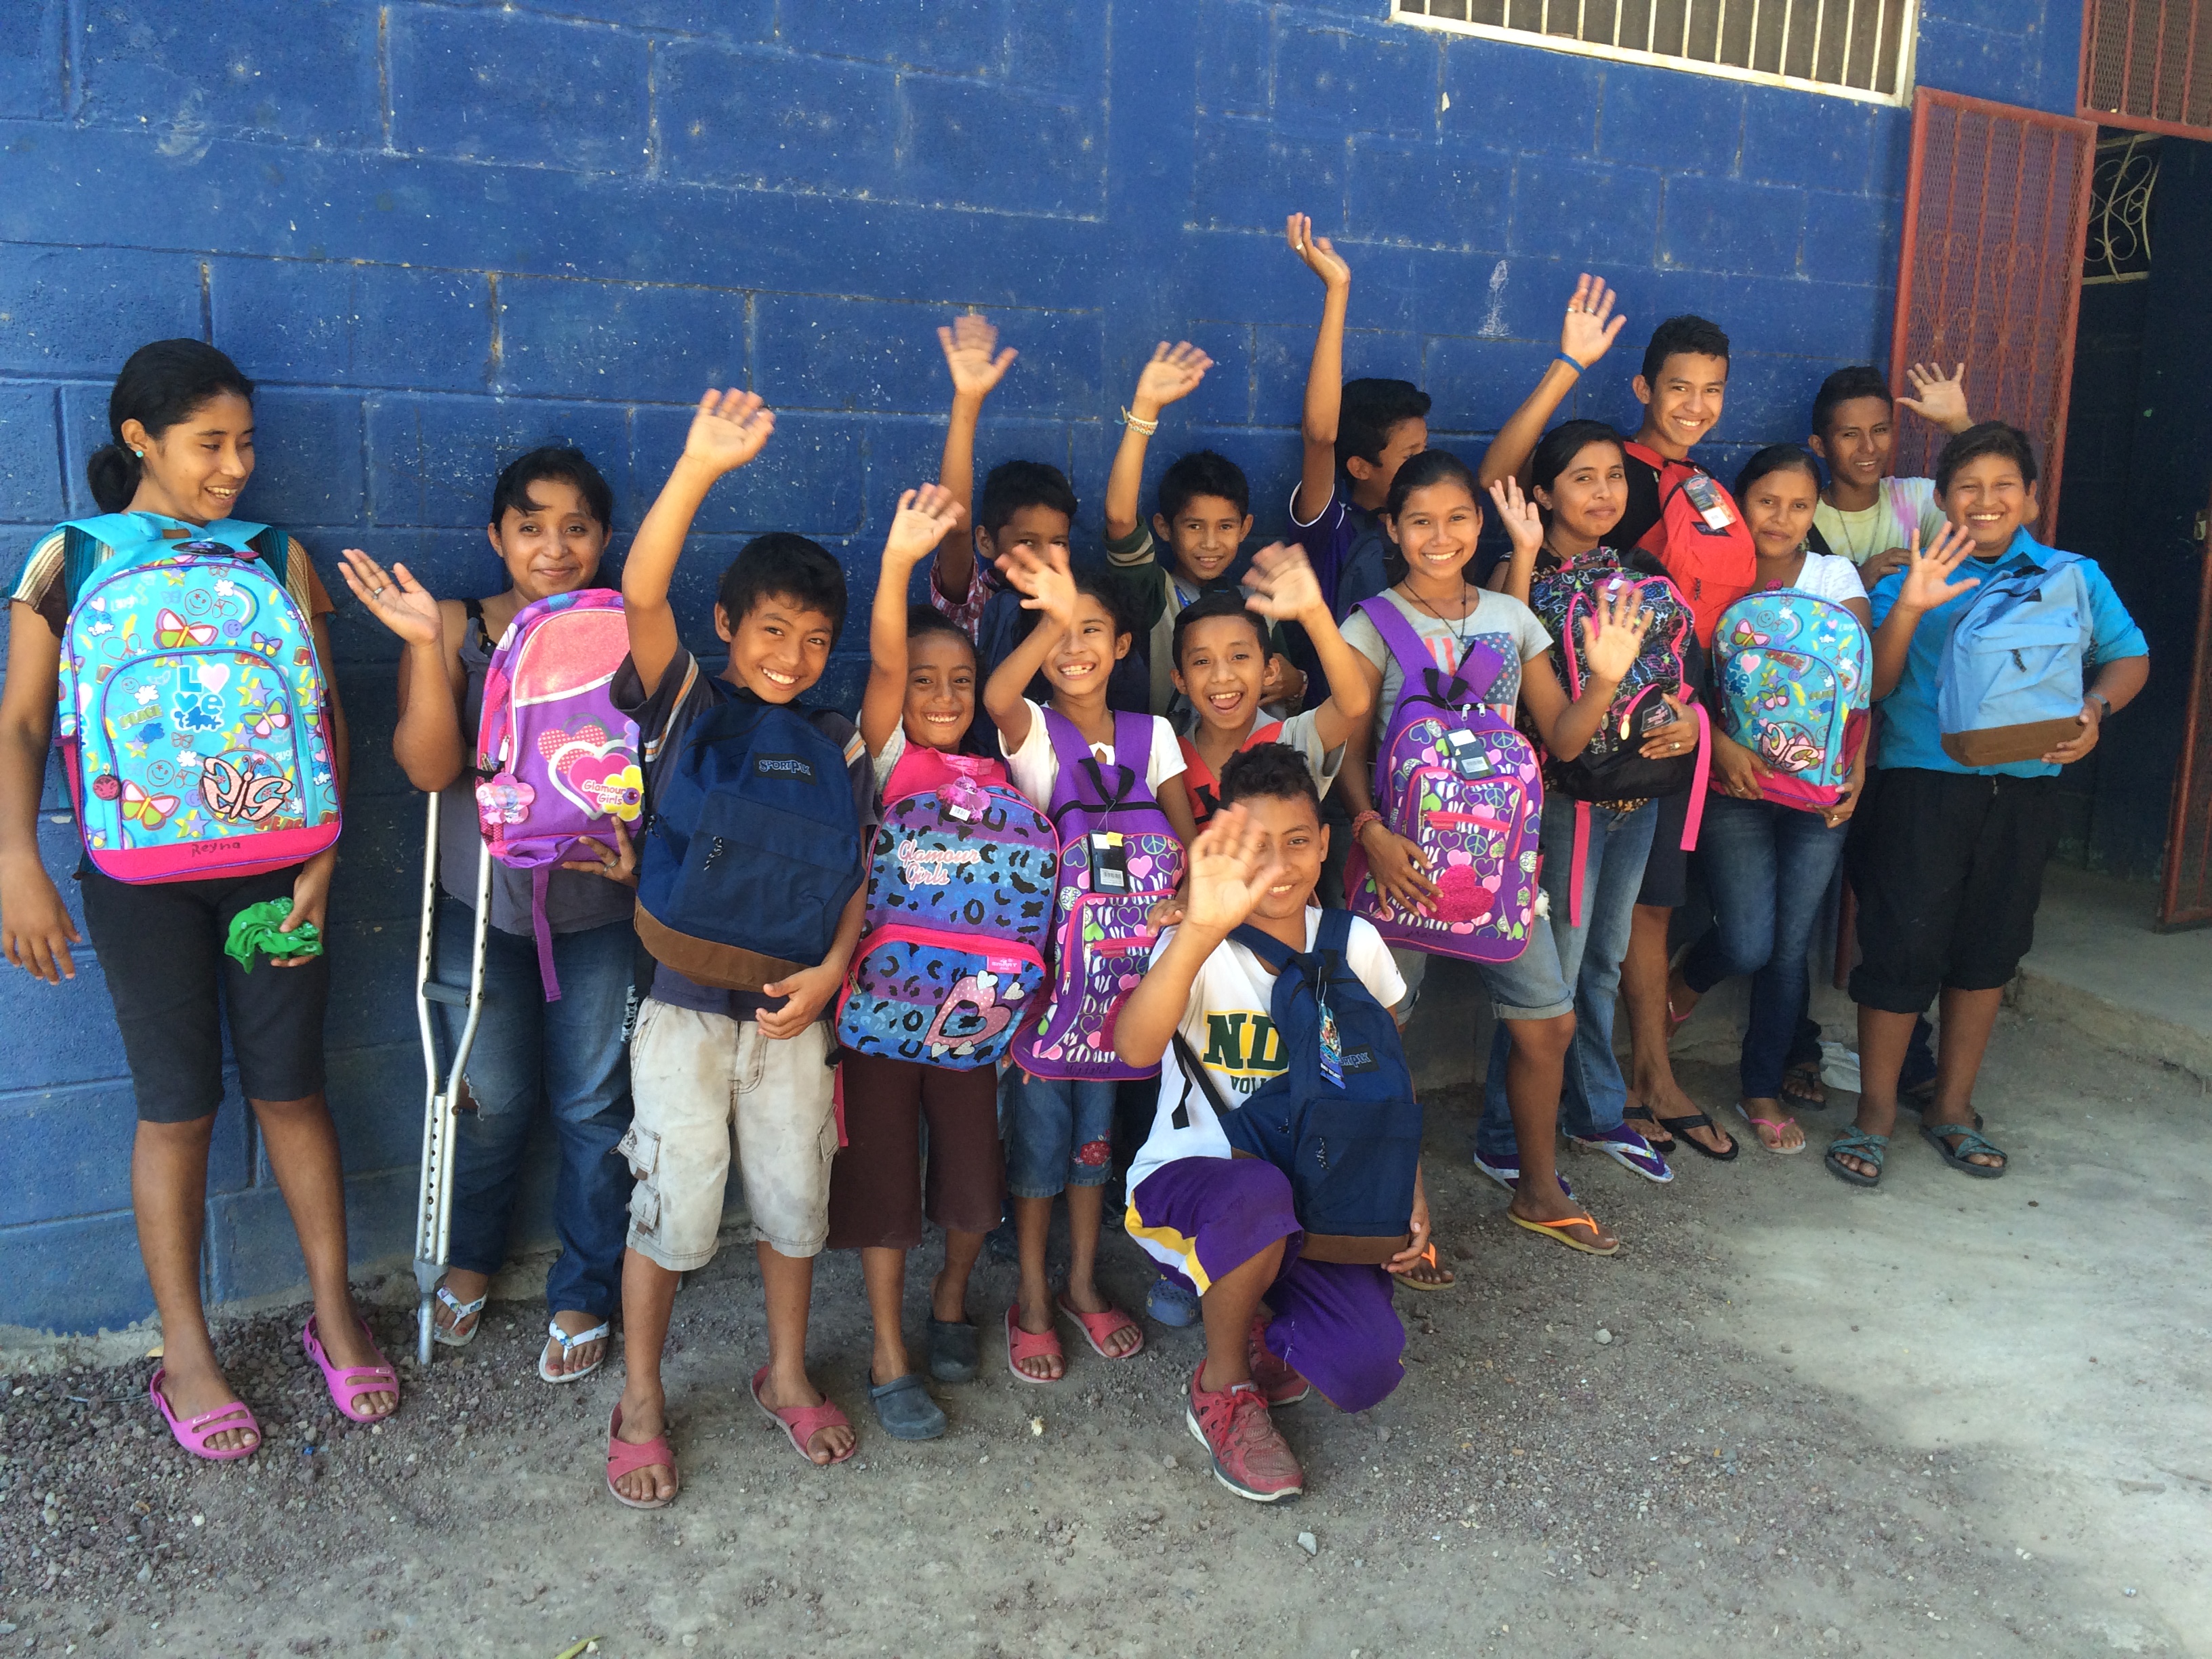 Some of the children who reside in the SHELTER full time say, "Gracias!"